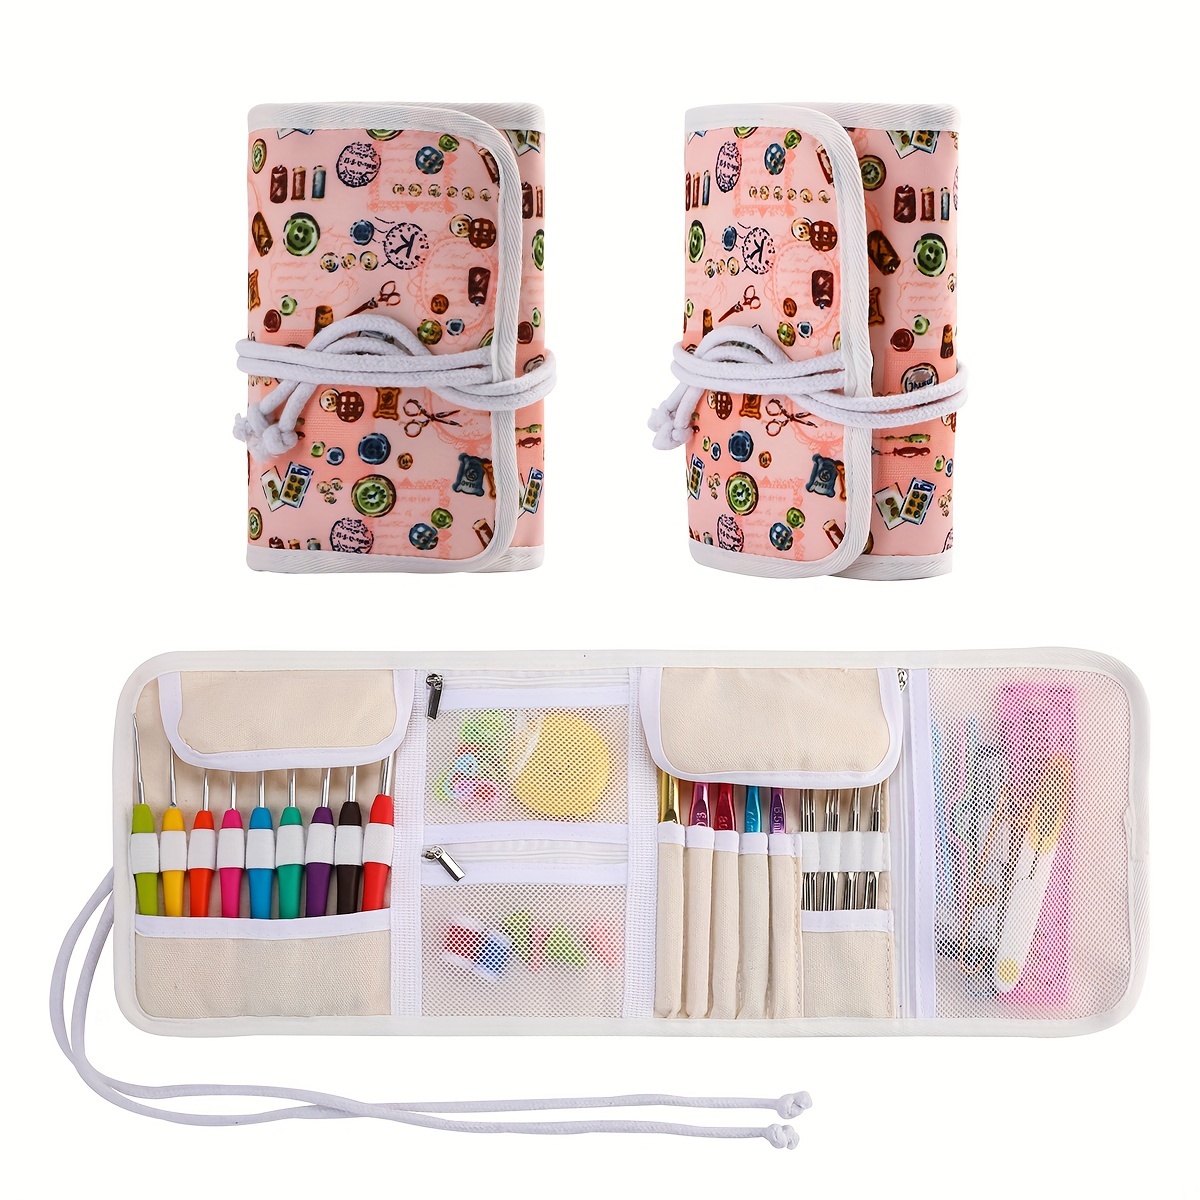  Katech Crochet Hooks Case Empty Zipper Bags Portable Travel  Crochet Storage Bag Organizer with Web Pocket and Crochet Holder Slots for  Carrying Various Crochets Needles (Pink) : Arts, Crafts & Sewing